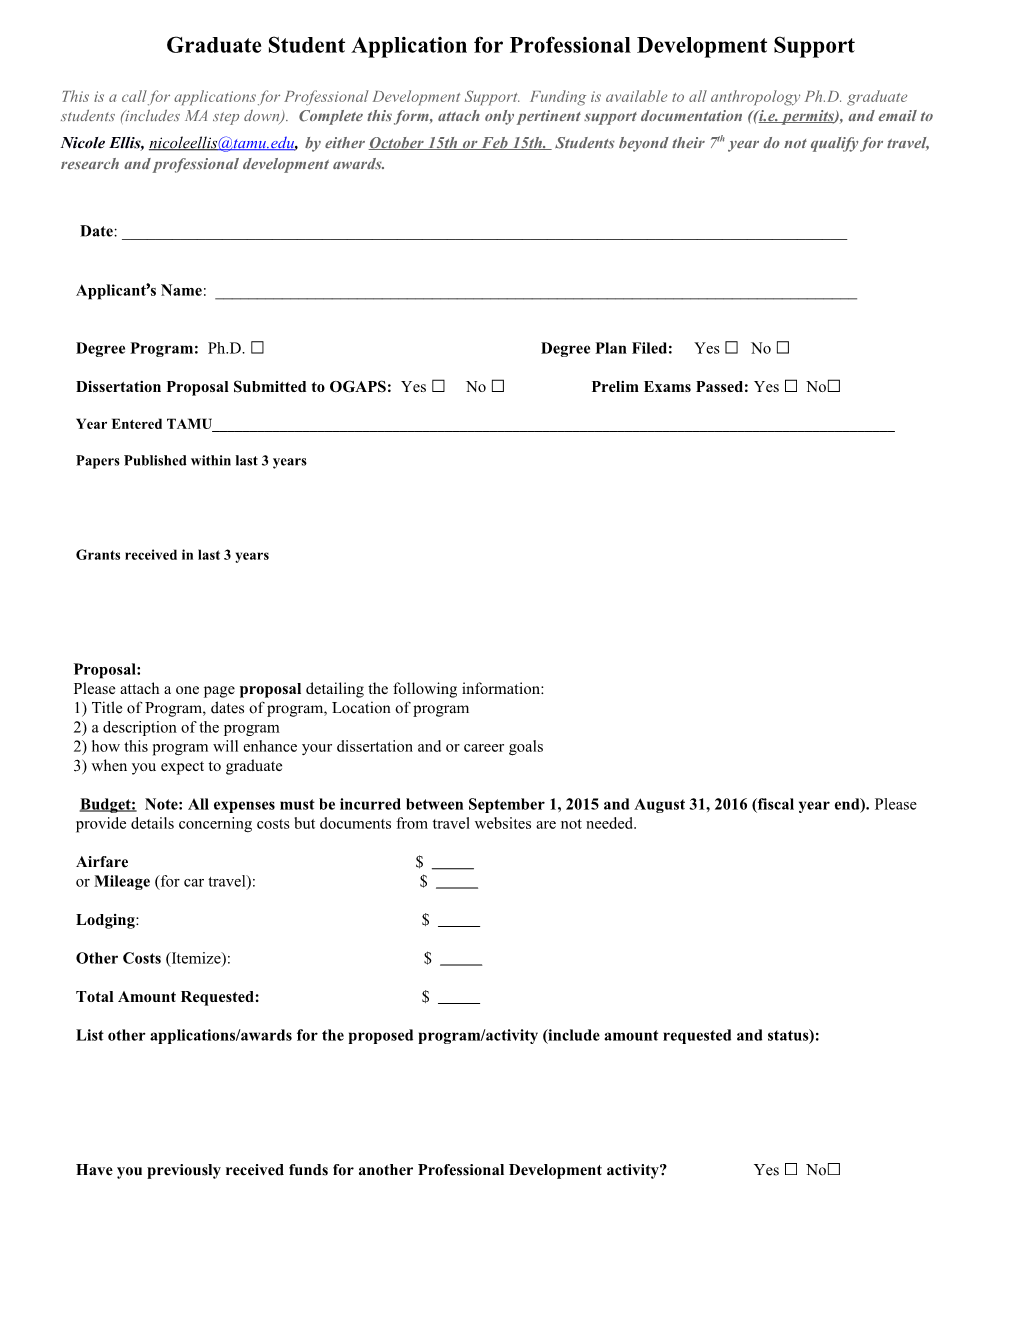 Graduate Student Application for Professional Development Support